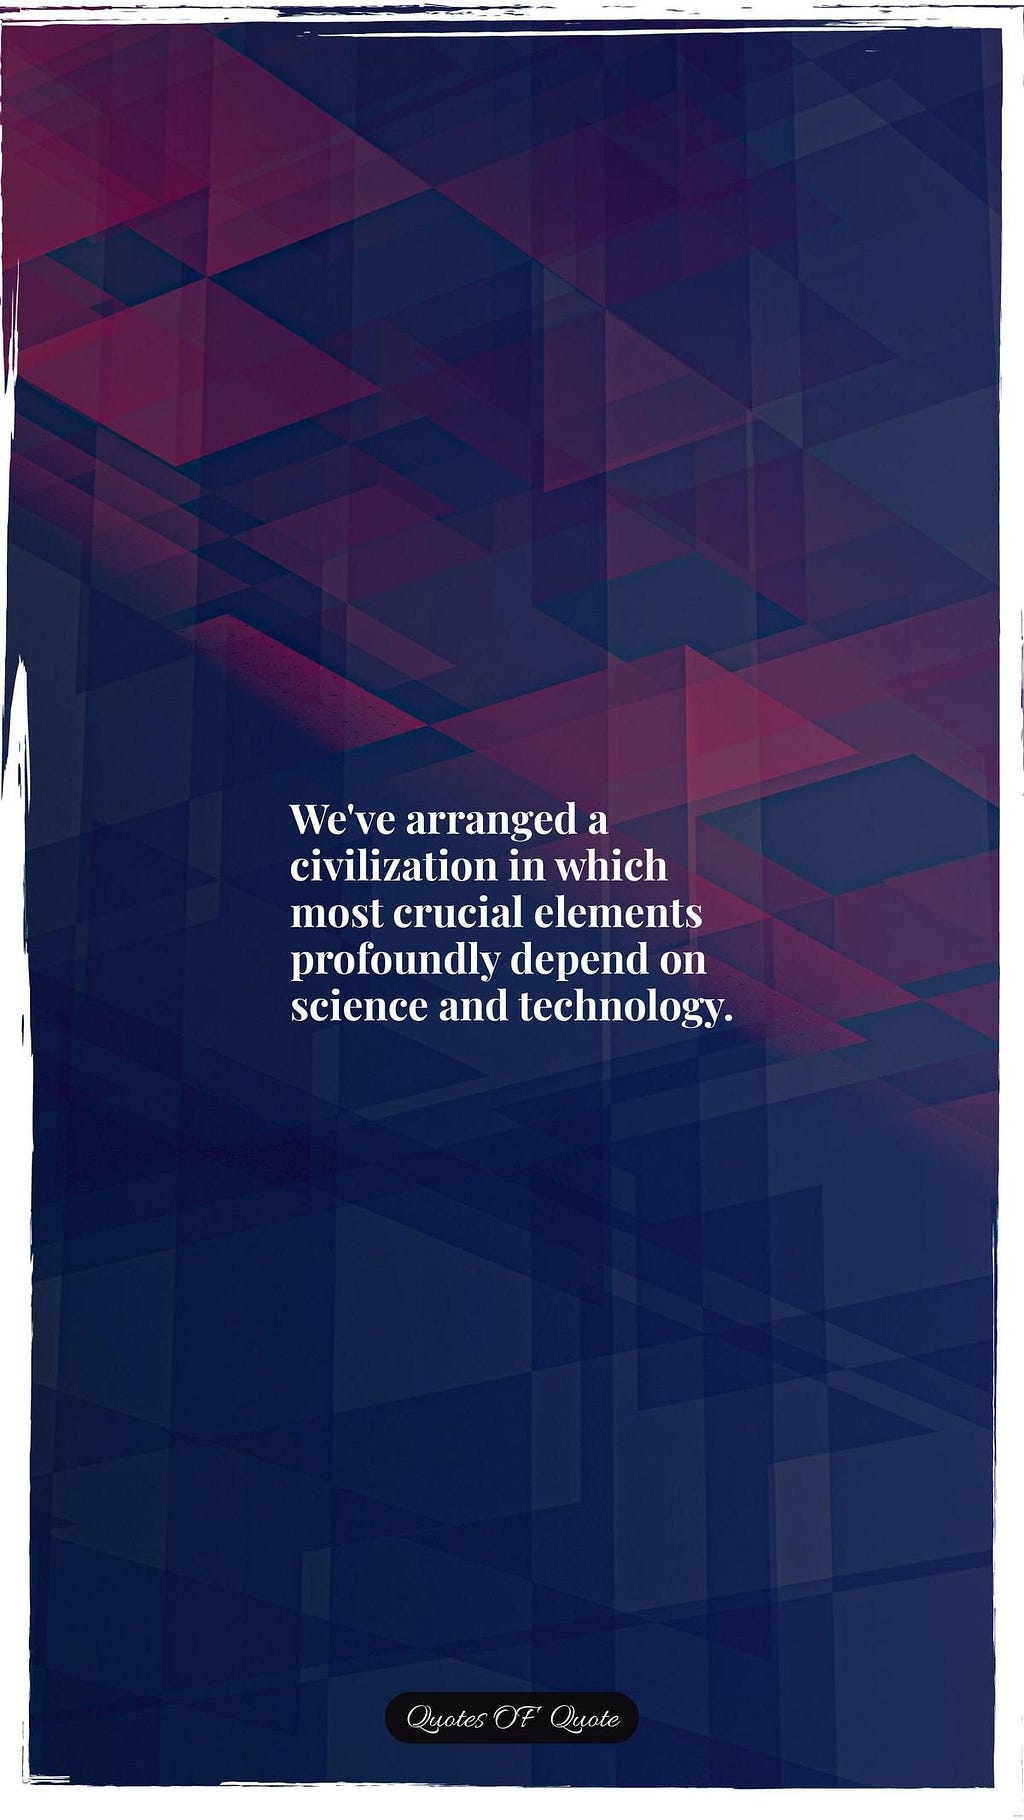 We've arranged a civilization in which most crucial elements profoundly depend on science and technology.